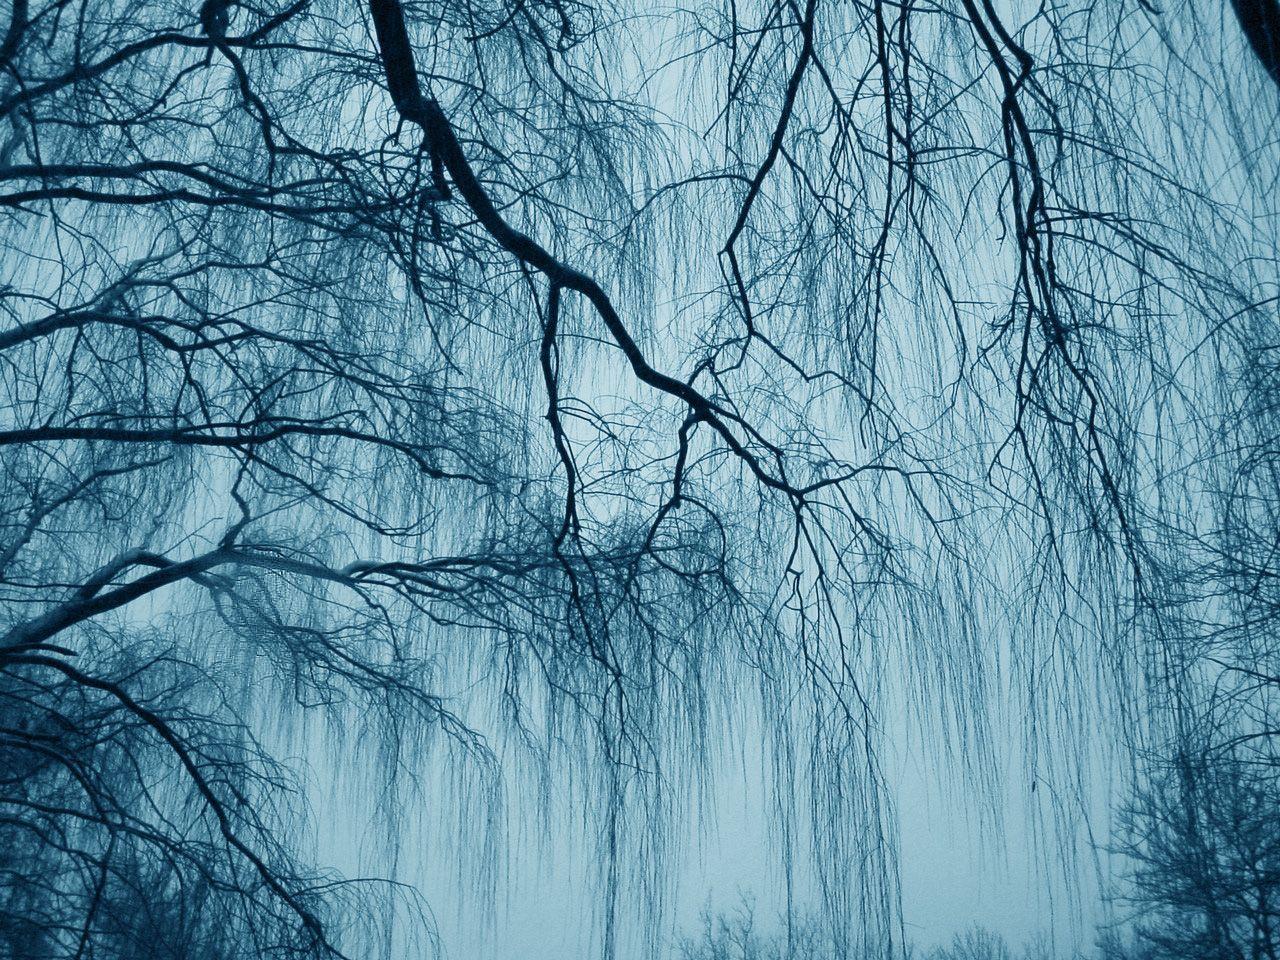 Image For Weeping Willow Tree In Winter.